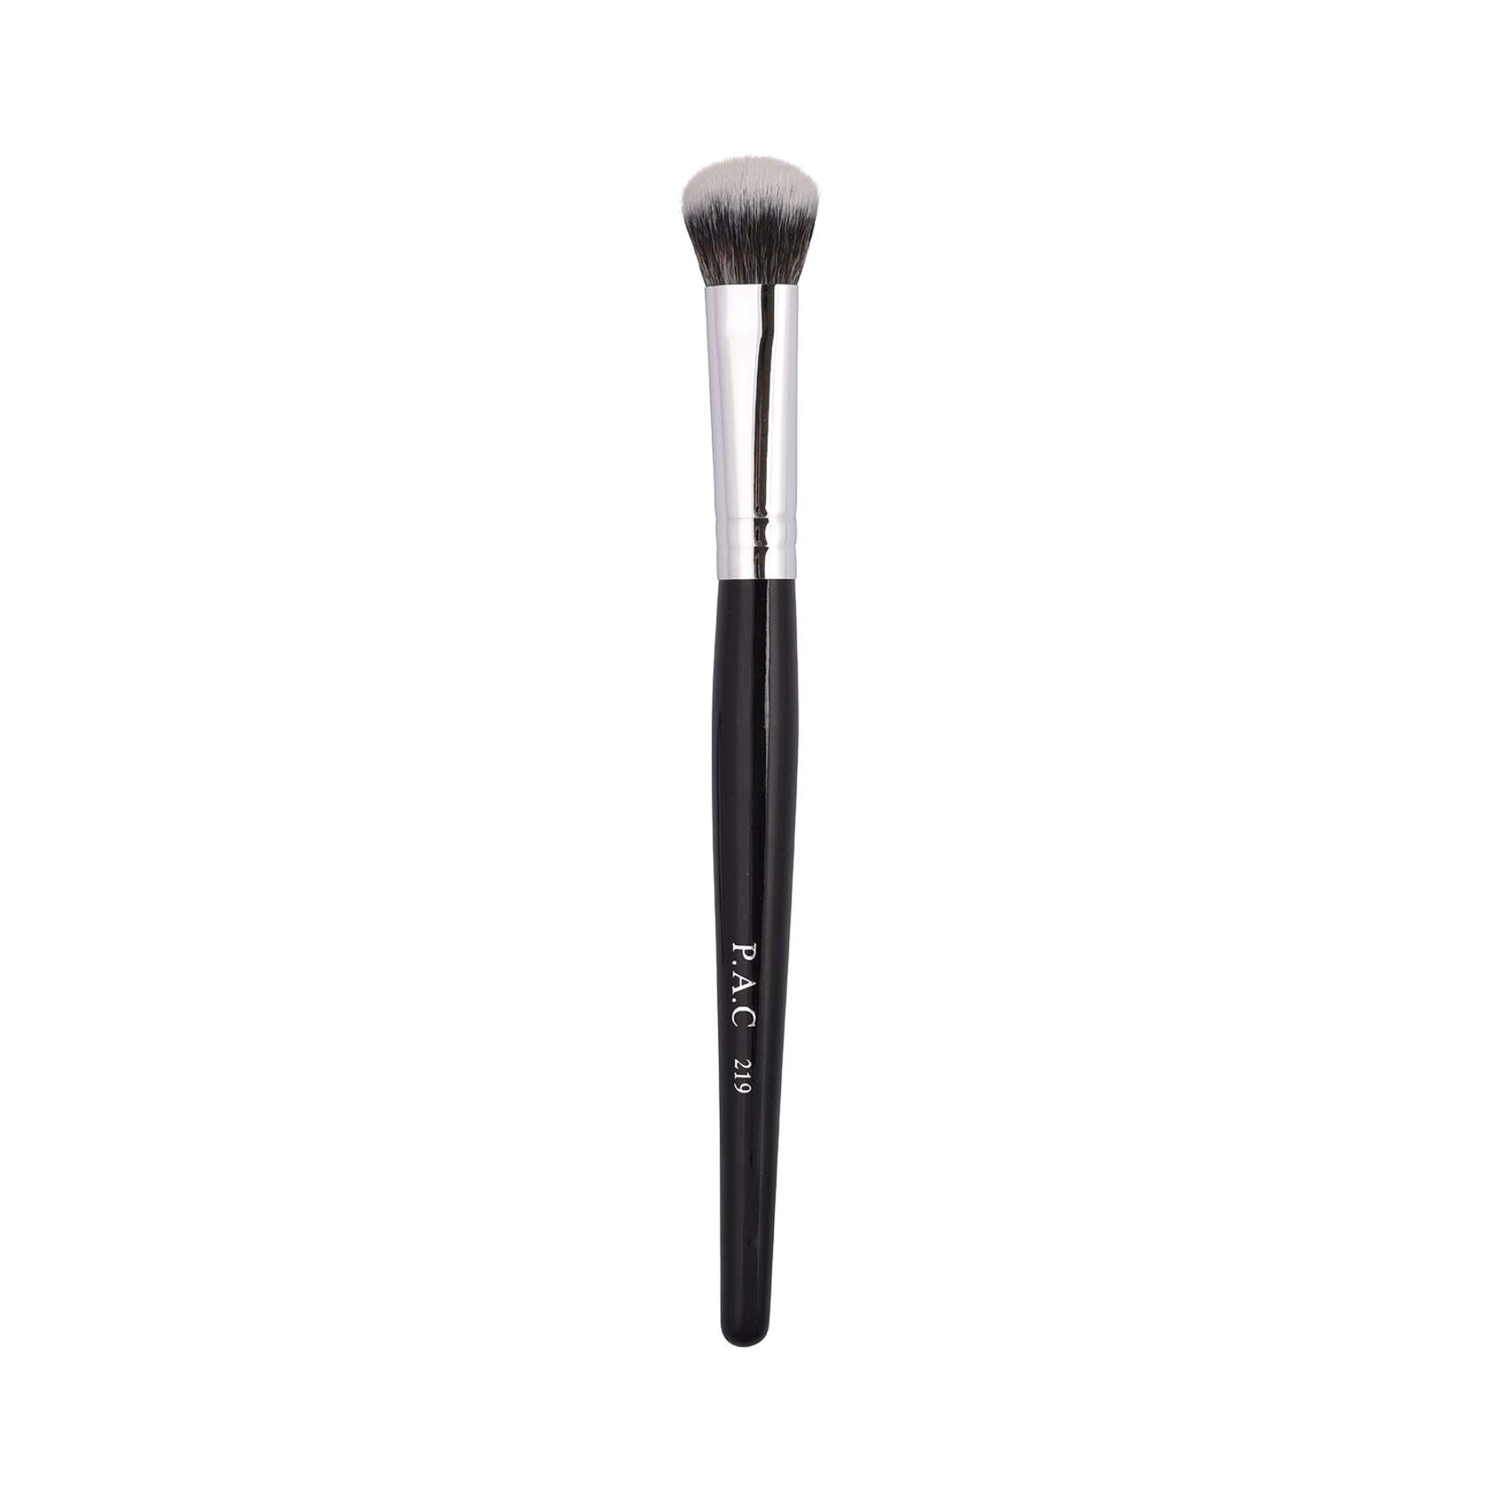 PAC | PAC Concealer Brush - 219 (1Pc)